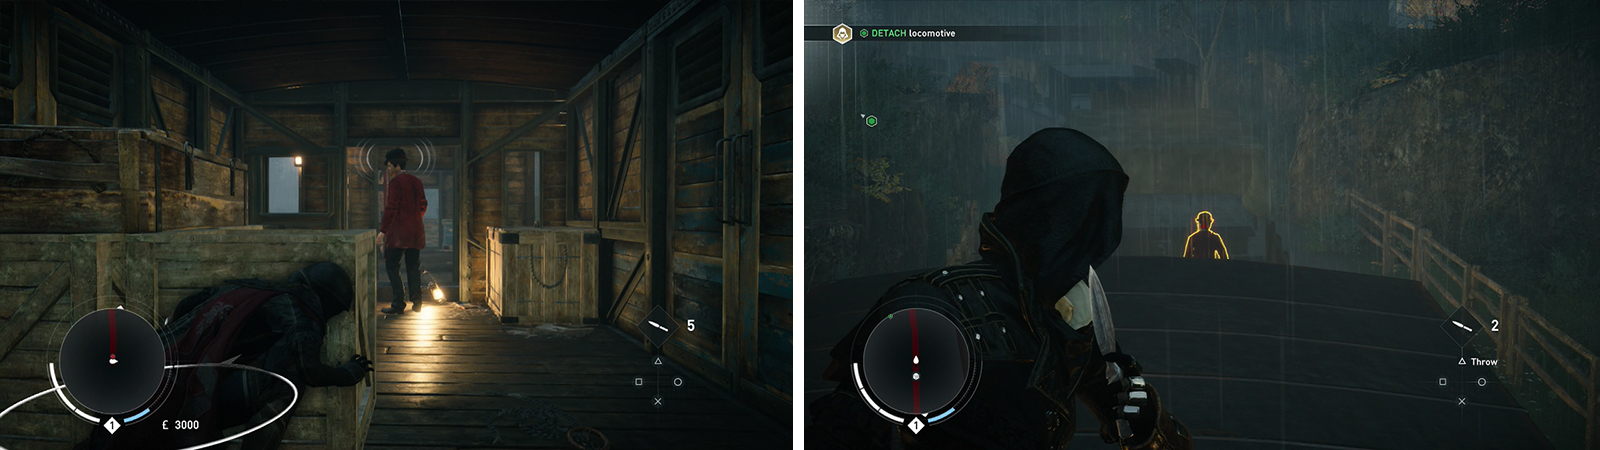 Use whistle to lure enemies into assassinations (left). Head shots with the throwing knives will kill most enemies (right).